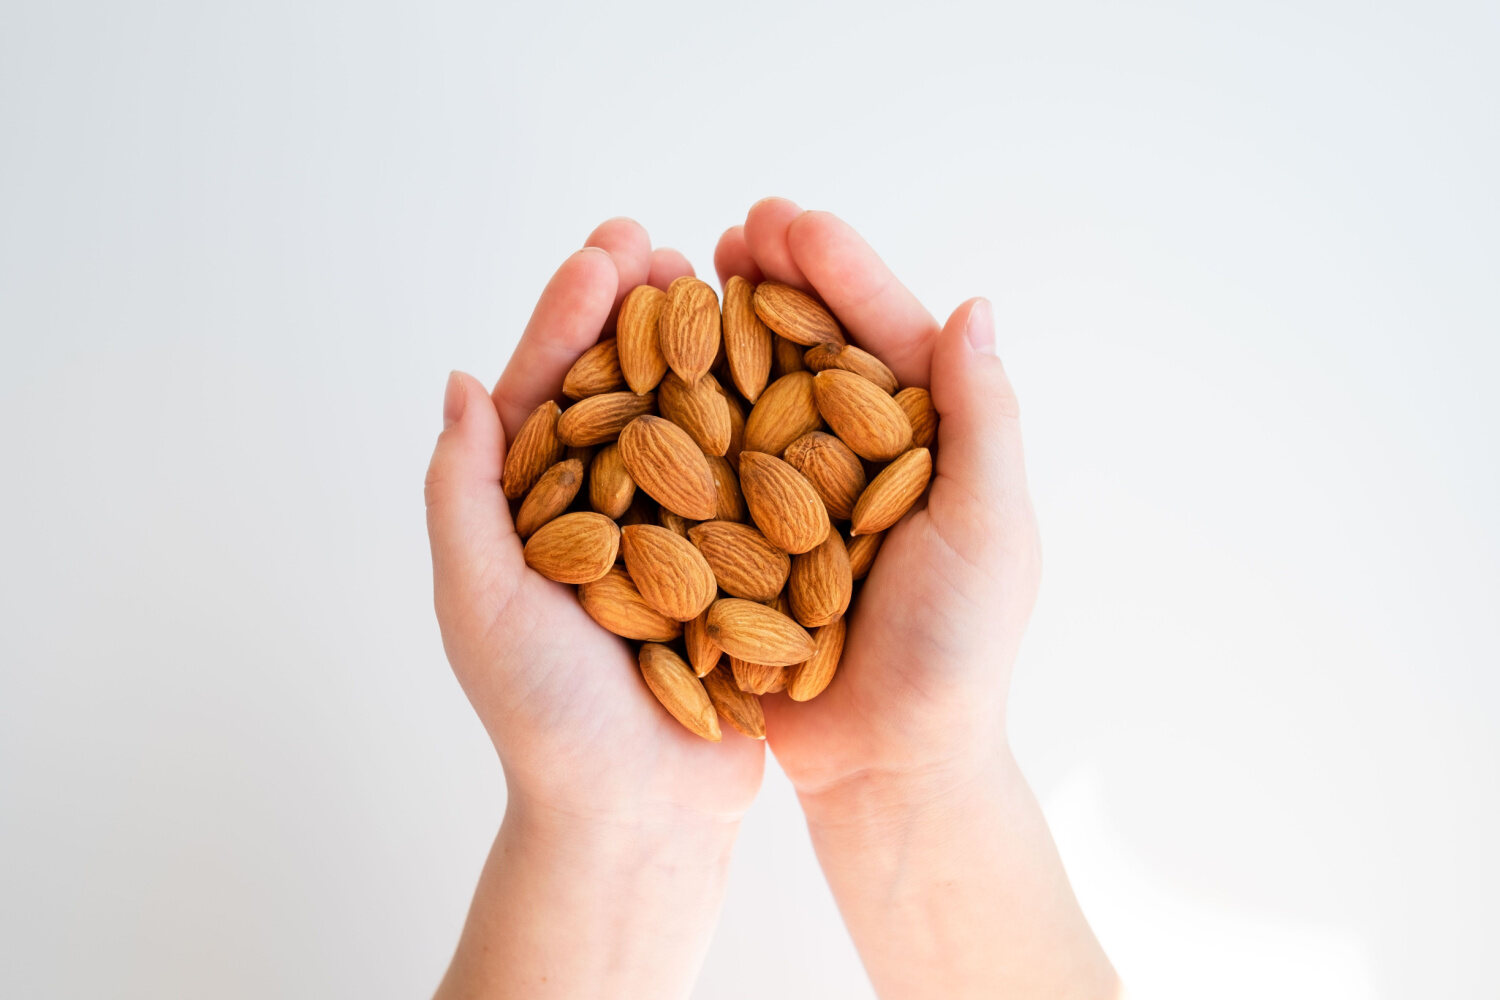 If your toddler is not allergic to almonds you can give them almond powder